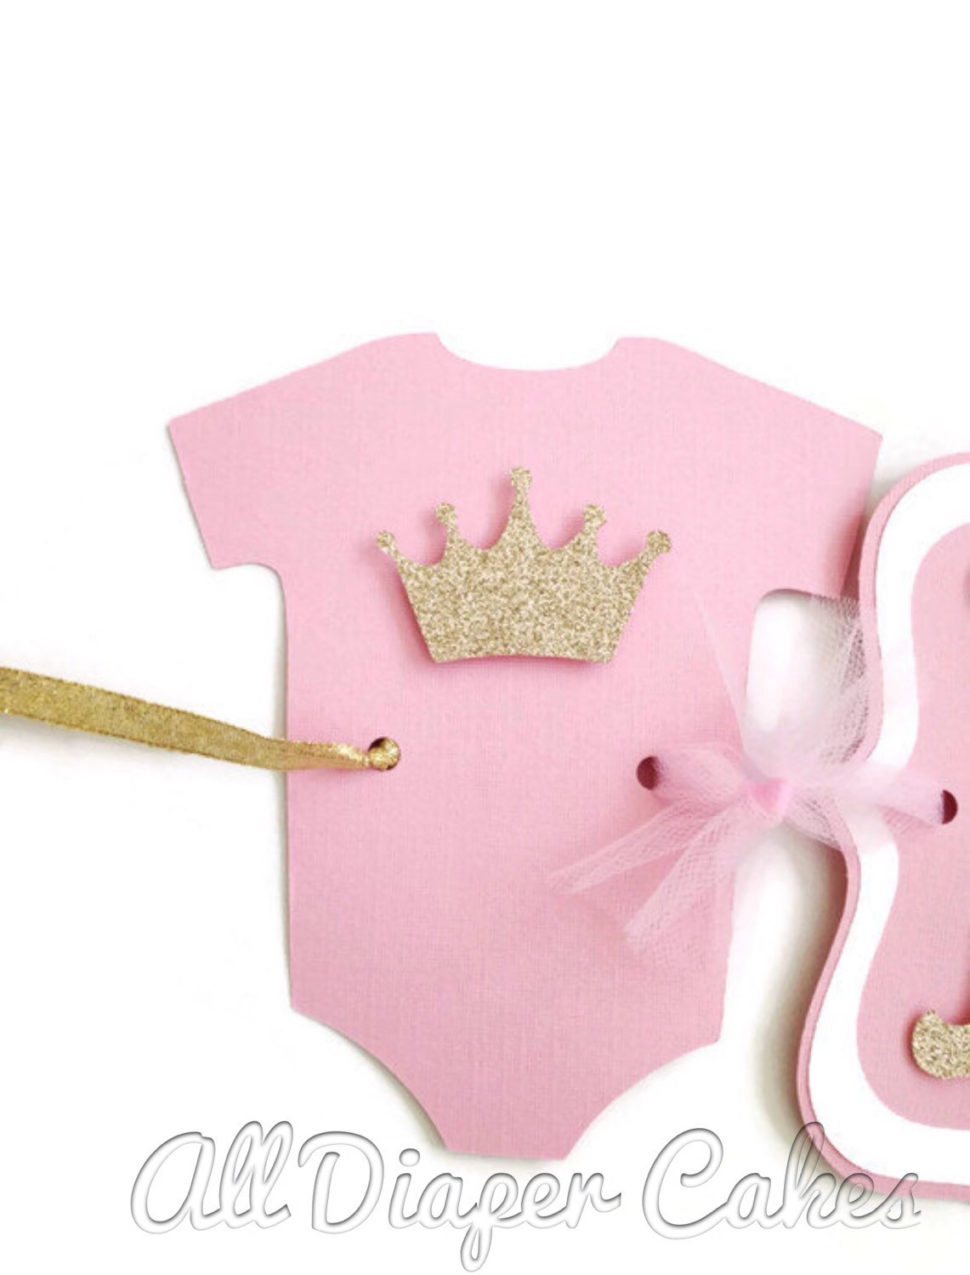 Medium Size of Baby Shower:89+ Indulging Baby Shower Banner Picture Inspirations Baby Shower Banner Princess Baby Shower Banner Pink And Gold Banner